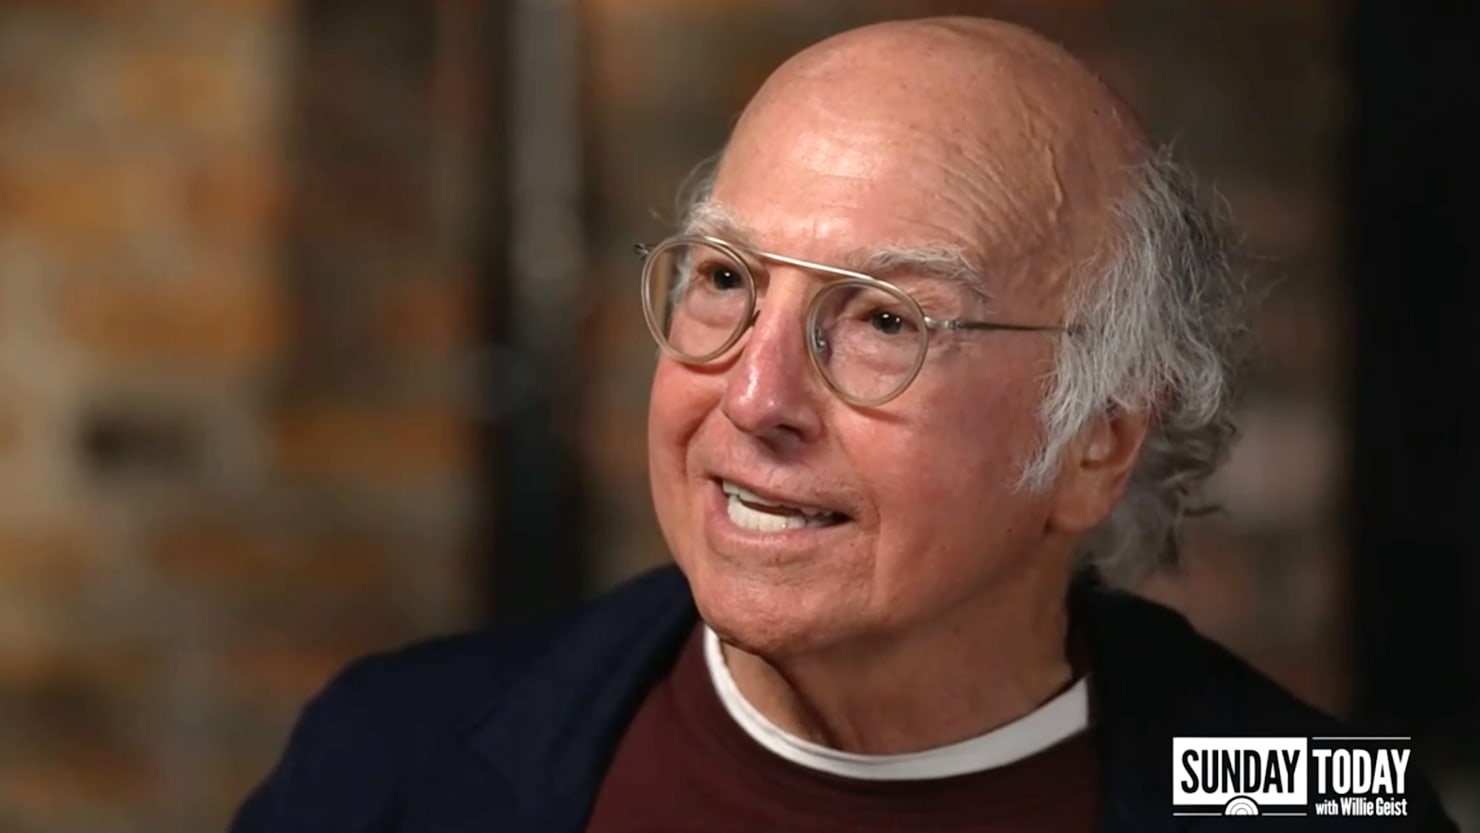 Larry David reveals why Curb Your Enthusiasm really ended